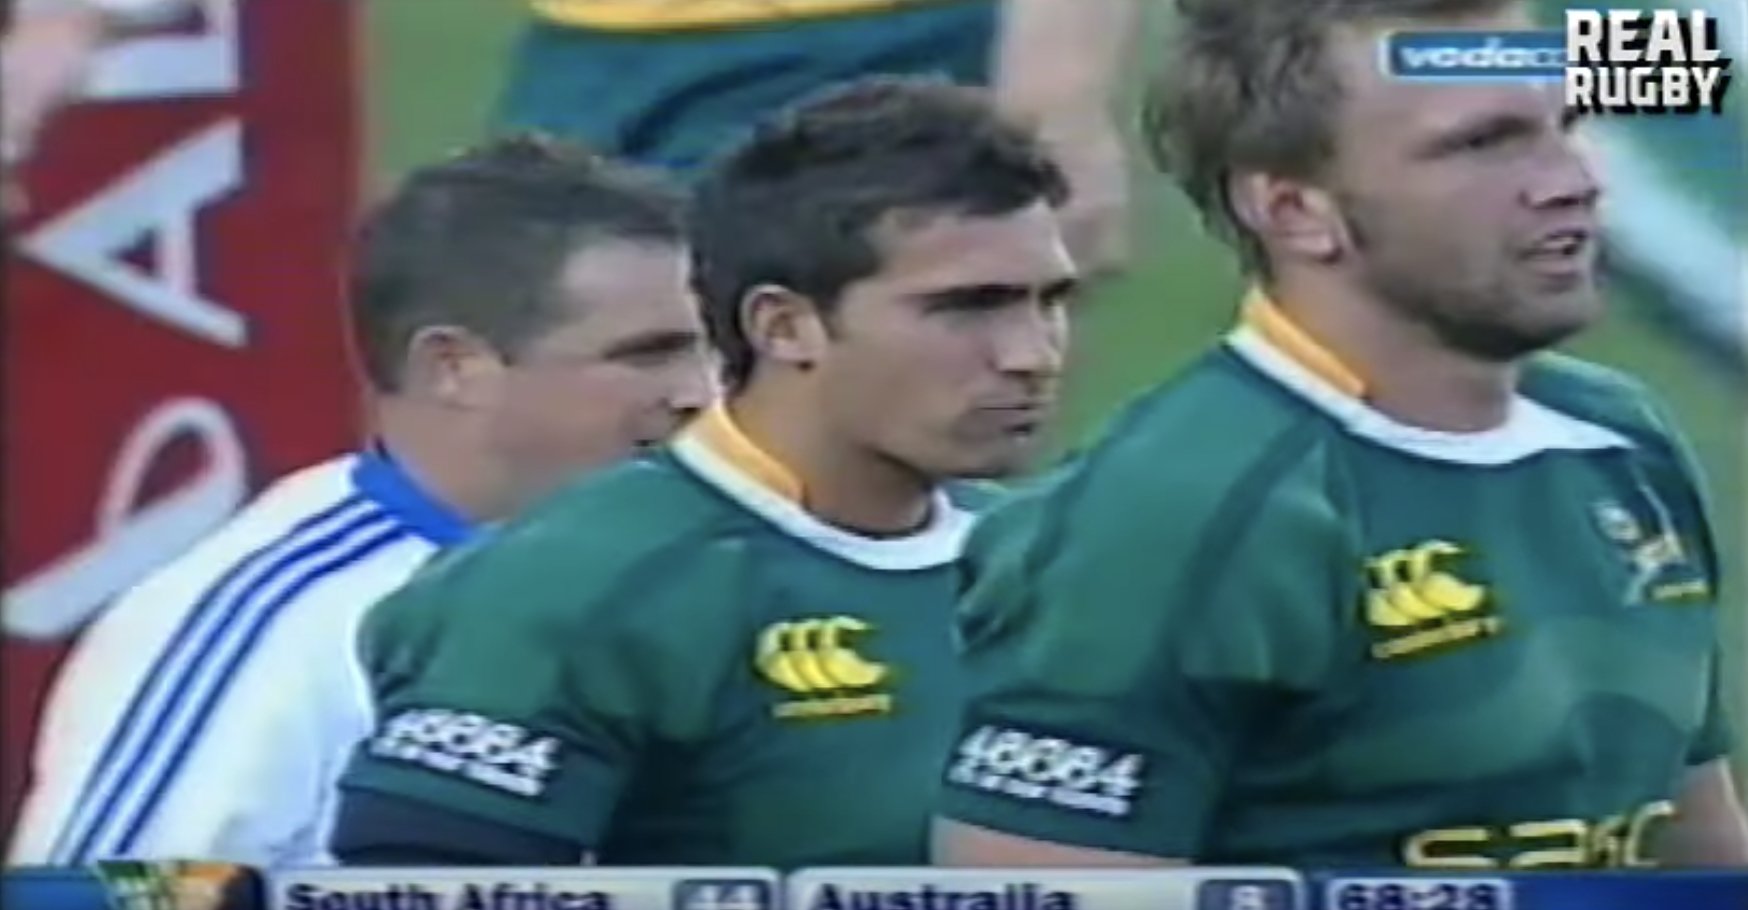 New video proves that Ruan Pienaar should be considered as one of the greatest Springboks of all time